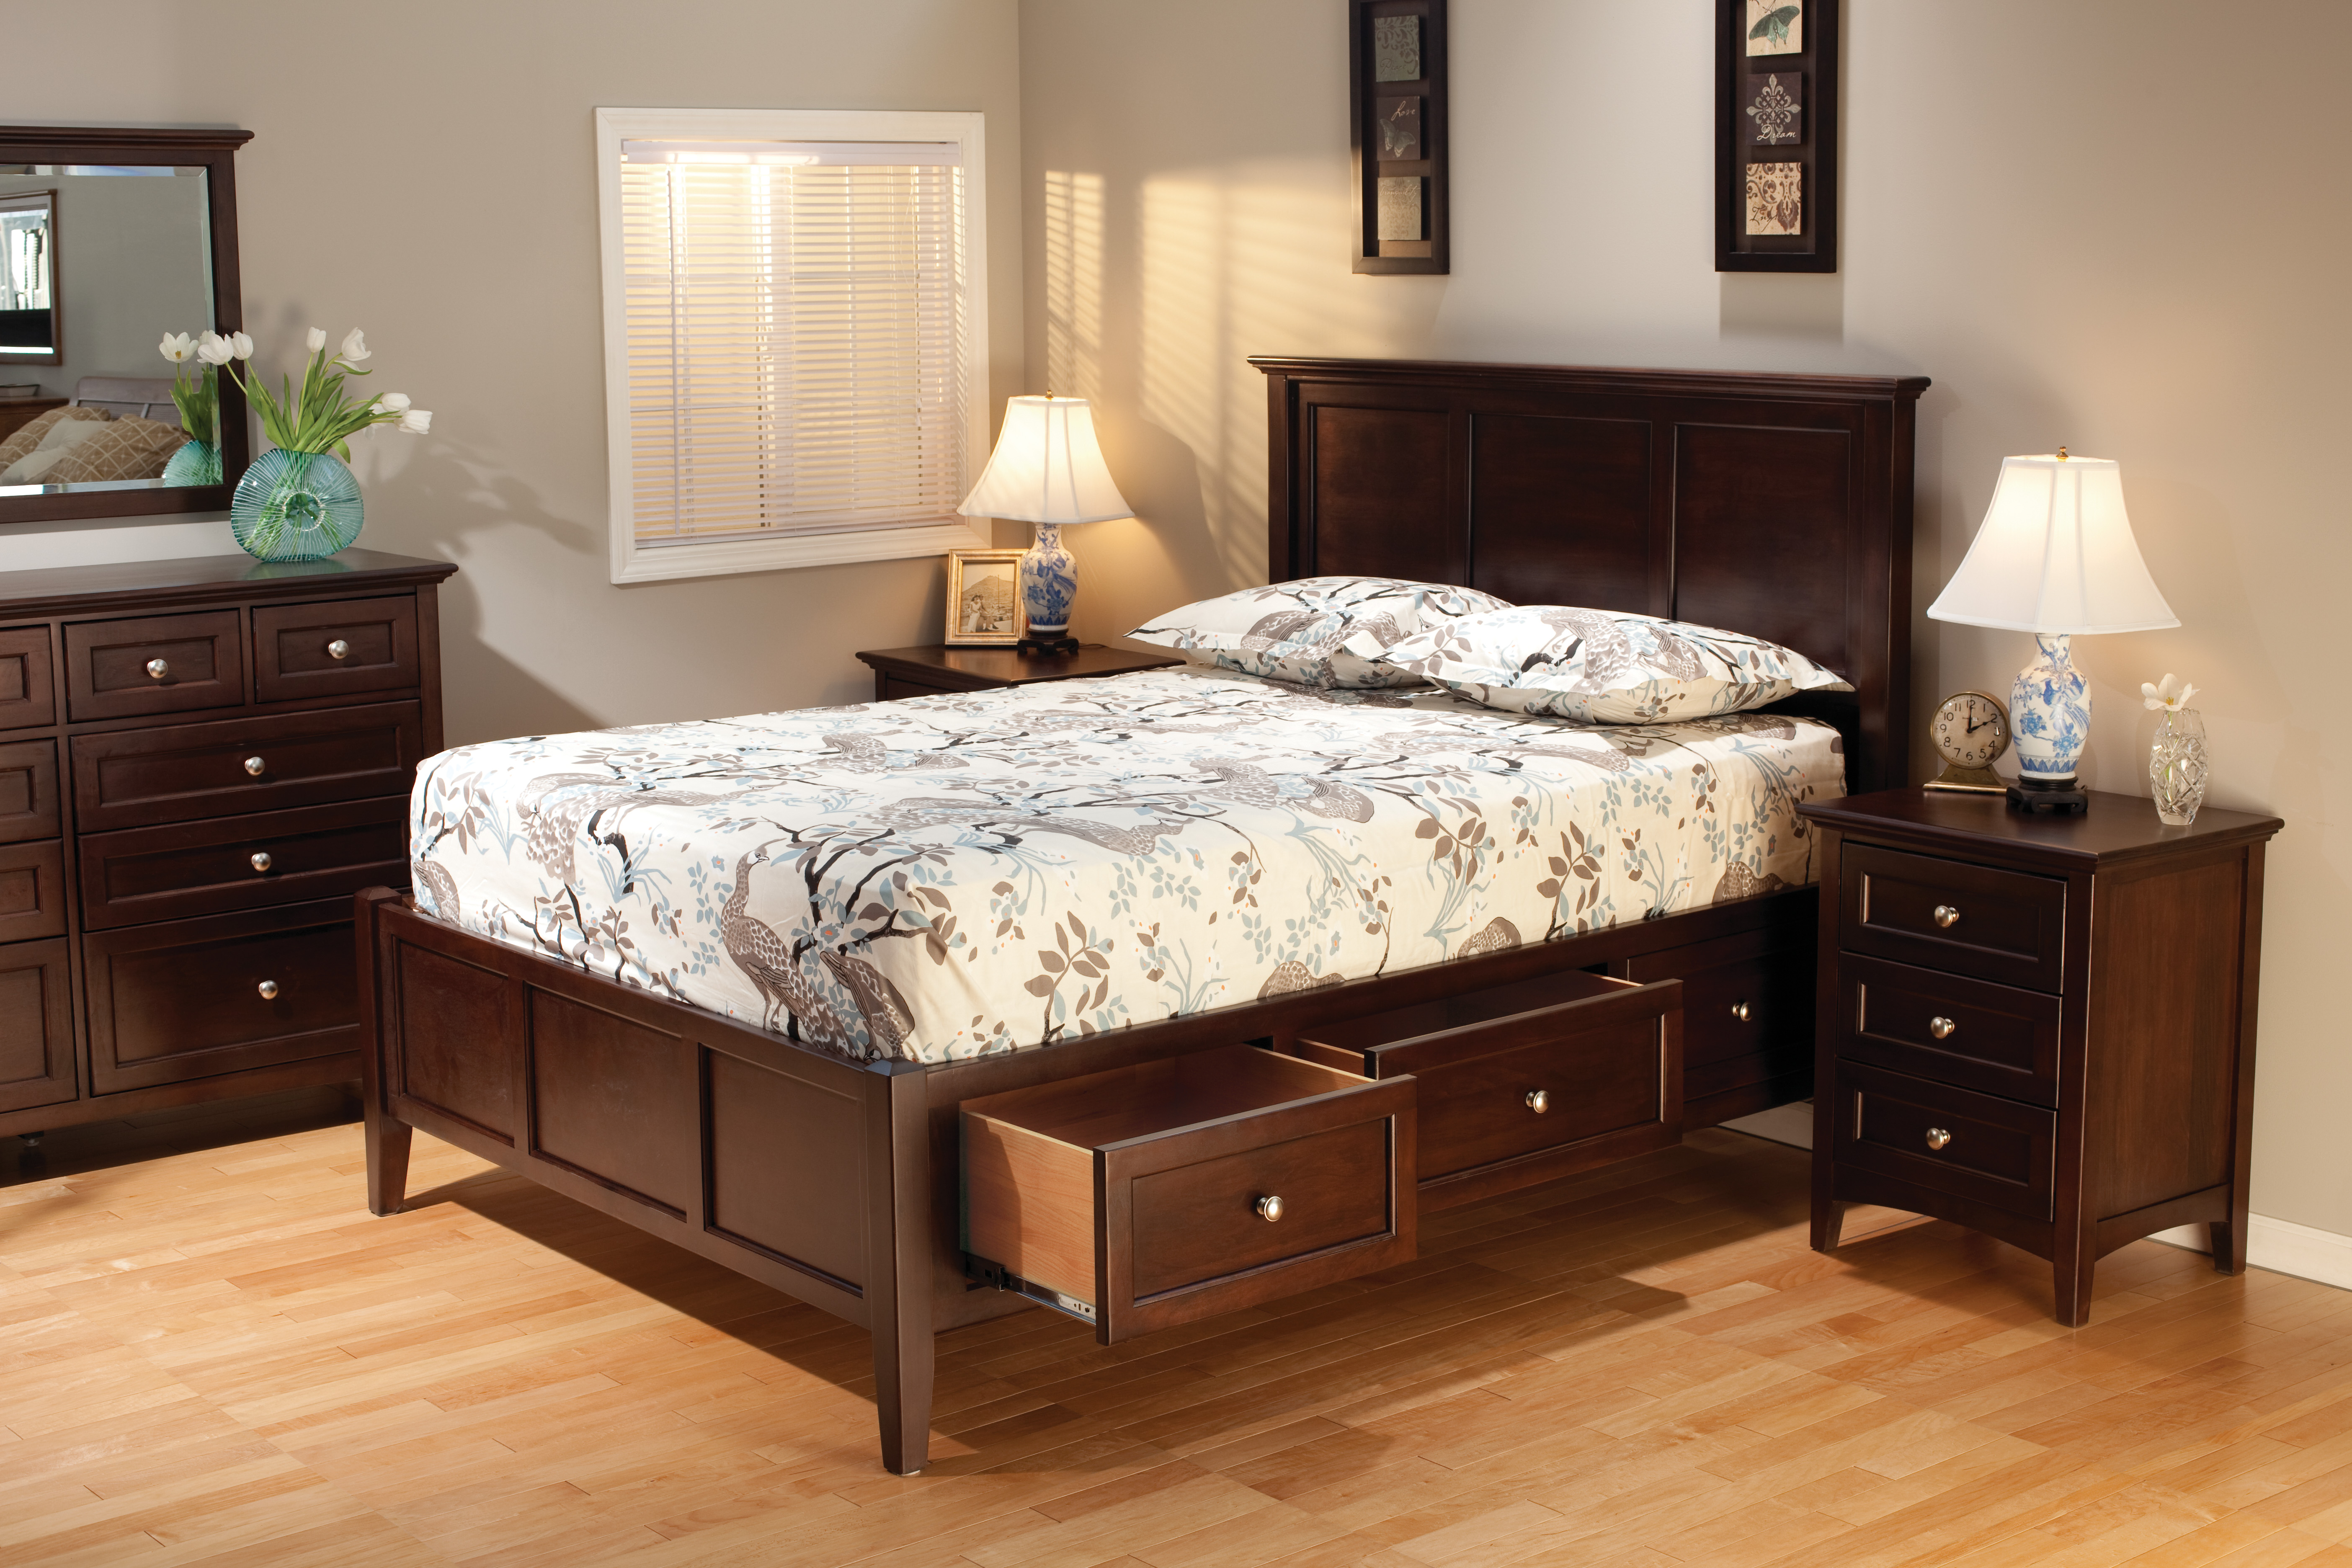 wood and white bedroom furniture